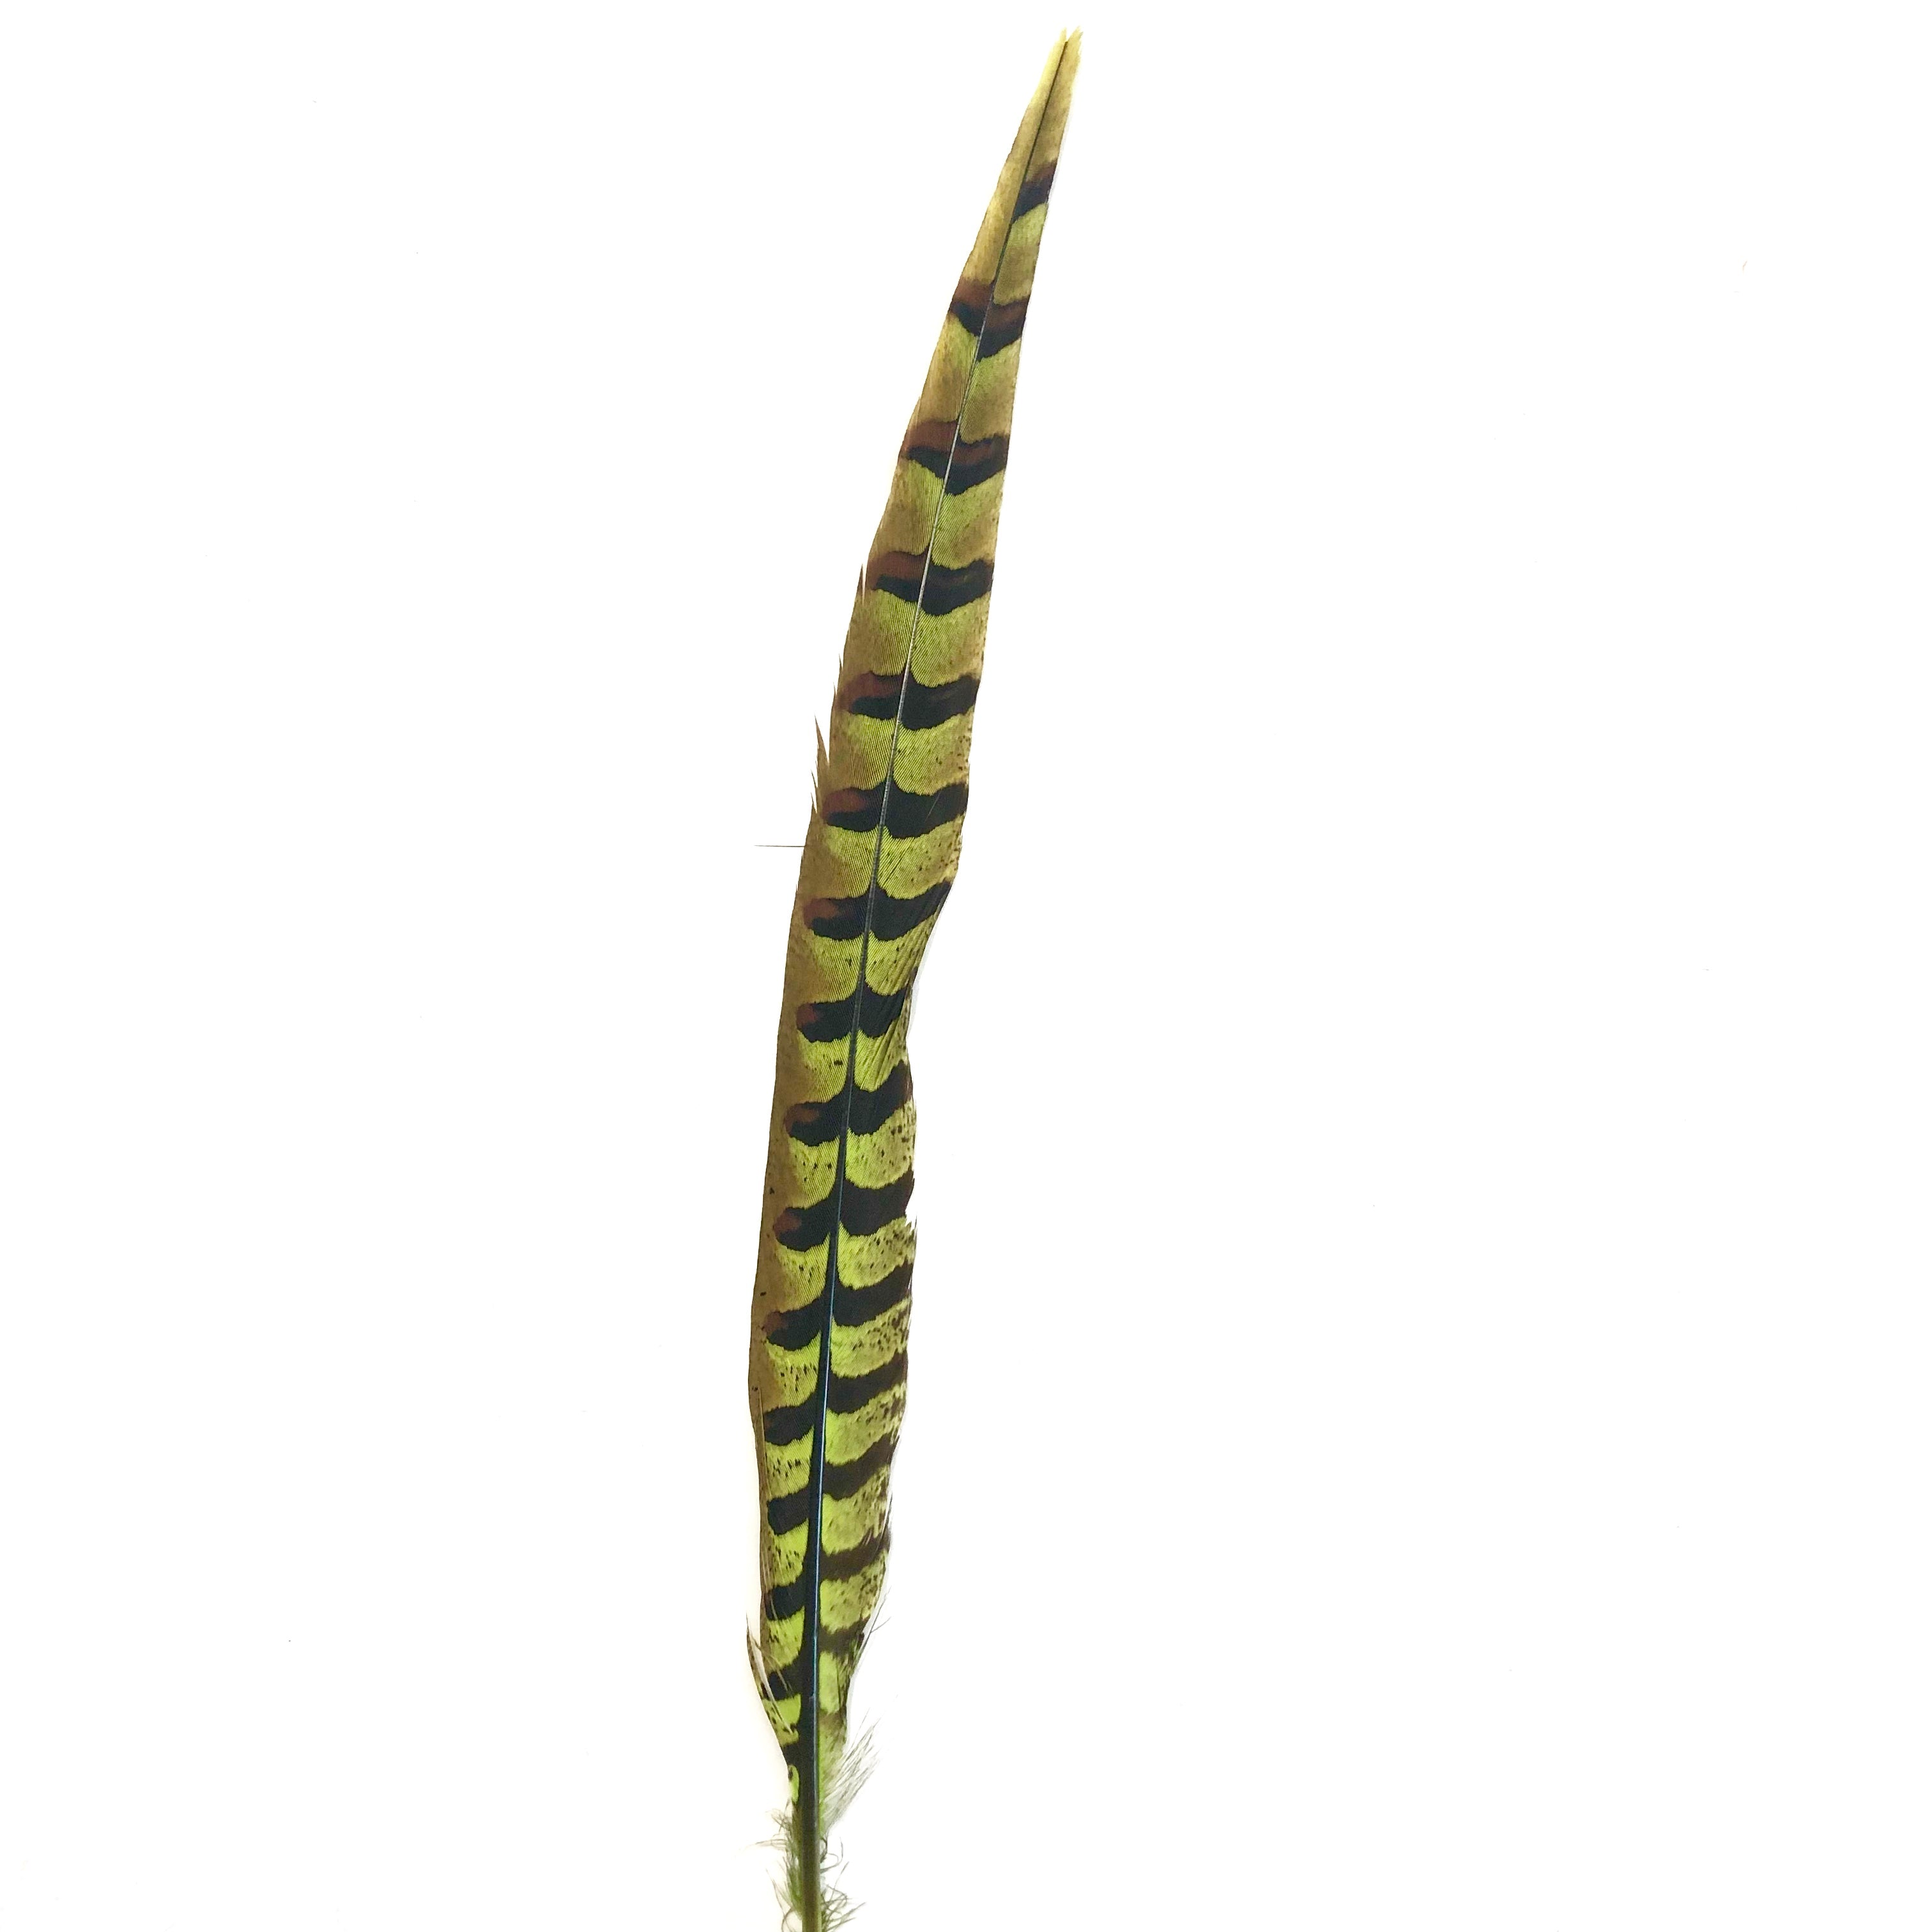 18" to 20" Reeves Pheasant Tail Feather - Lime Green